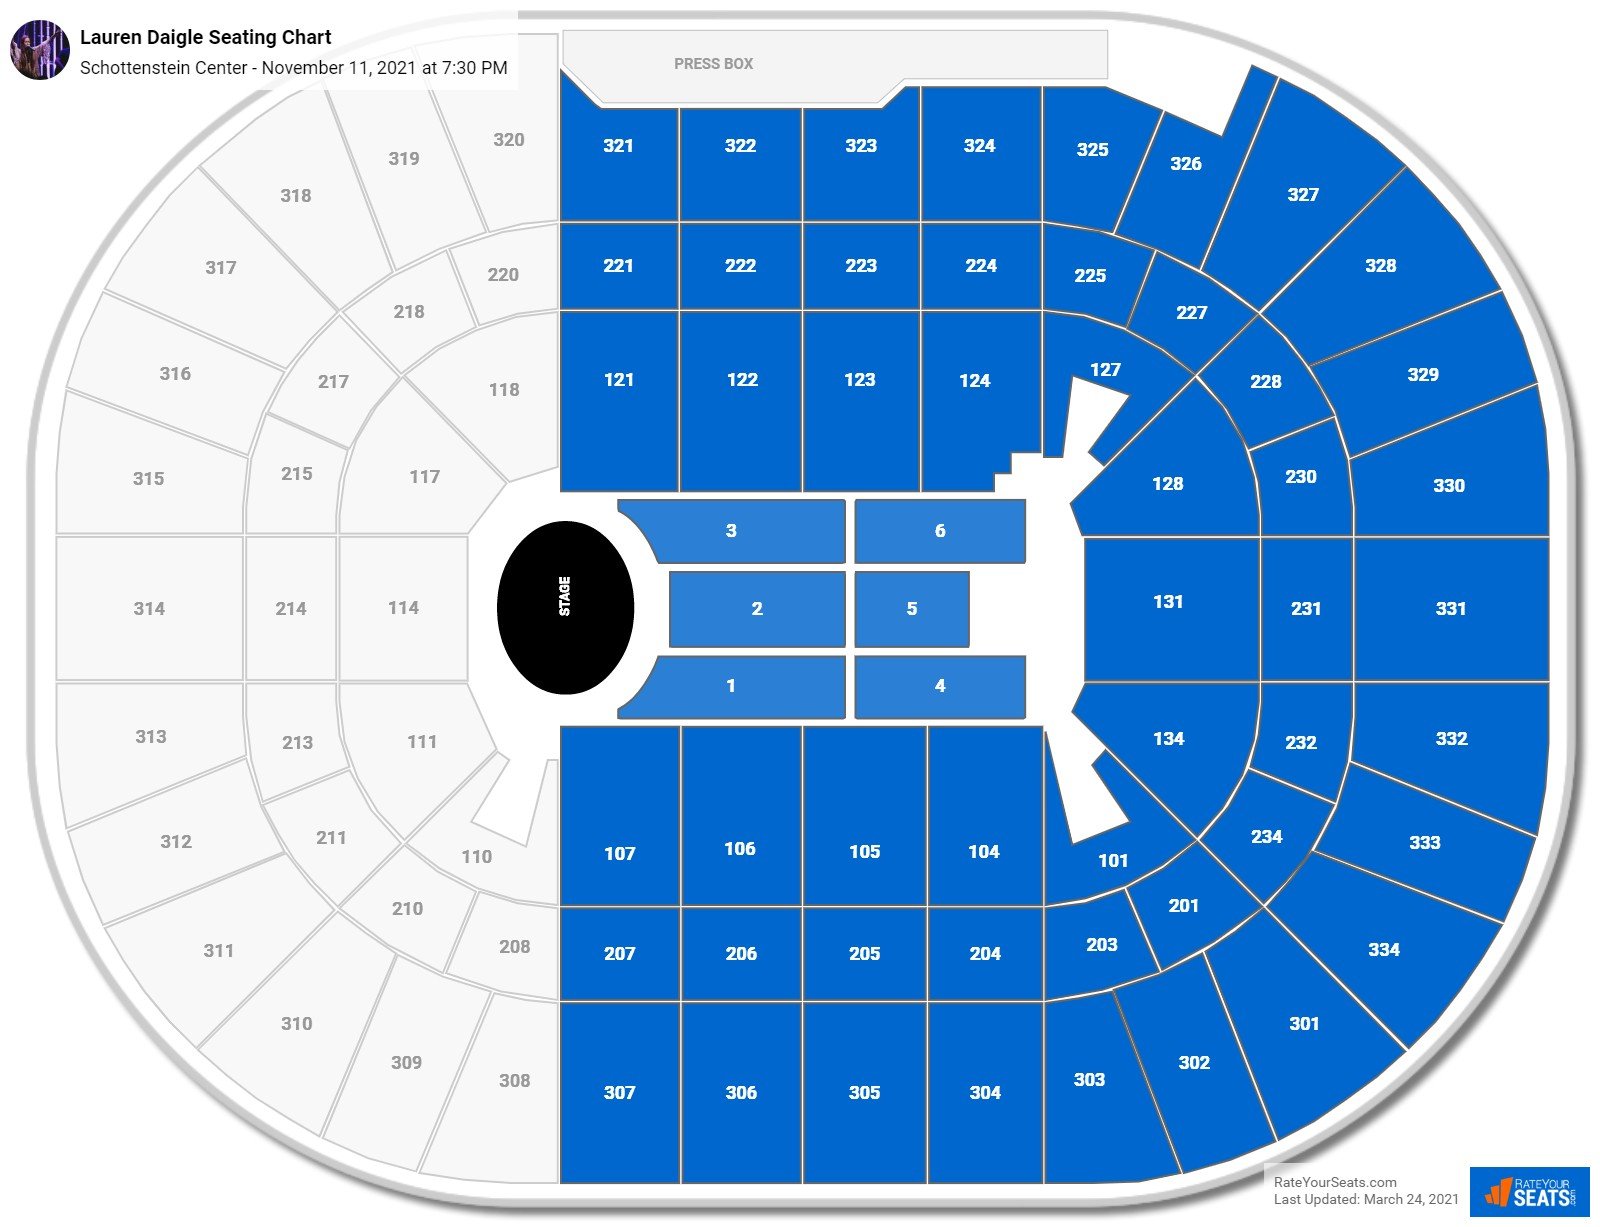 Schottenstein Center Seating Charts for Concerts